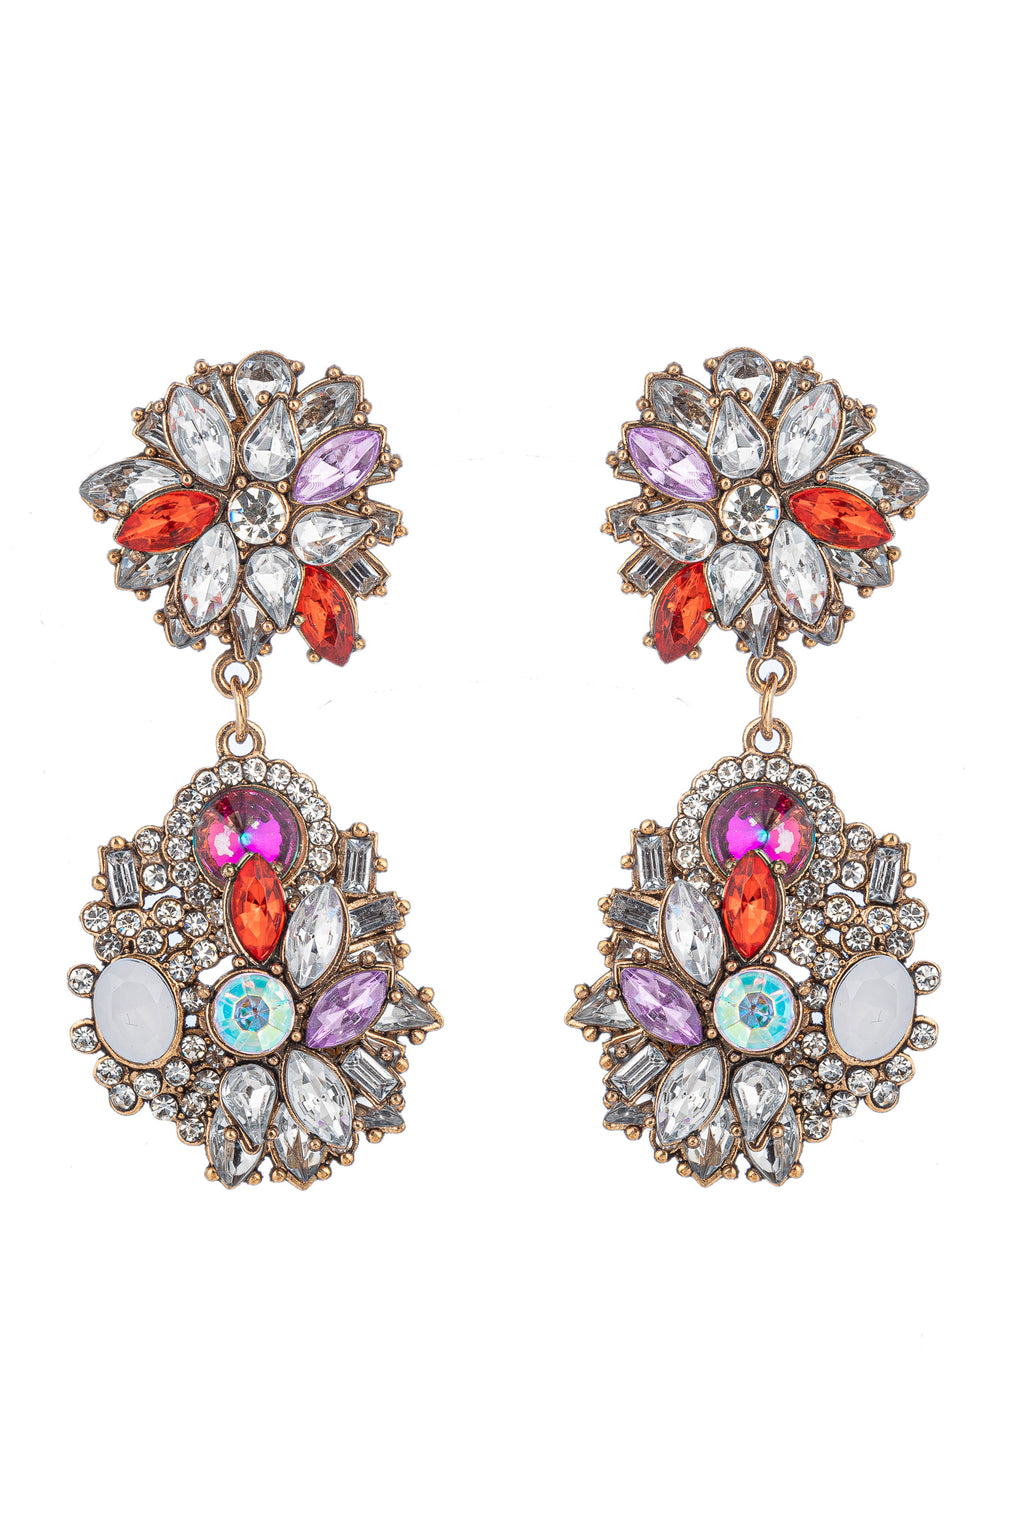 Rainbow alloy drop earrings studded with glass crystals.